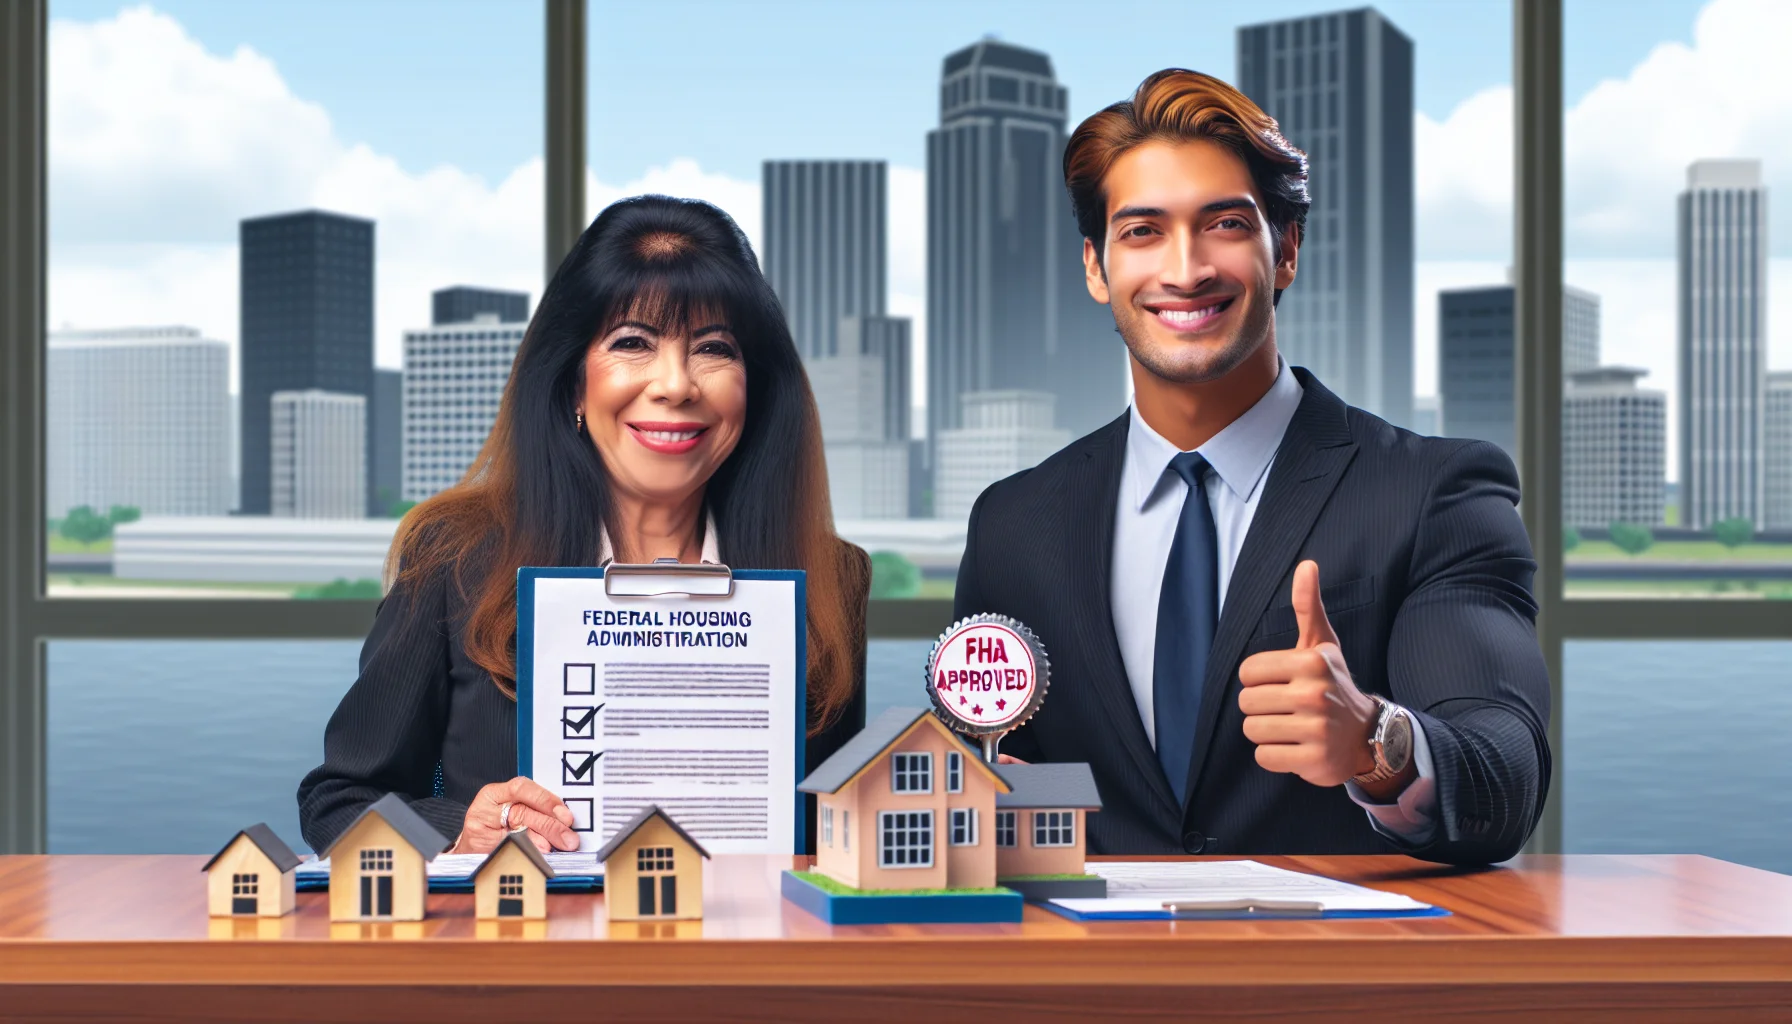 Create a humorous, realistic scene of the ideal scenario for qualifying for FHA (Federal Housing Administration) loans in real estate. Picture a smiling middle-aged Hispanic woman who is a successful realtor, wearing a business suit and holding a checklist with marked boxes. Beside her, imagine a confident young South Asian man holding an 'FHA approved' stamp confidently over a house plan. They are in a well-organized real estate office filled with mini models of houses and skyscrapers. The office window provides a view of a bustling city teeming with potential homebuyers.